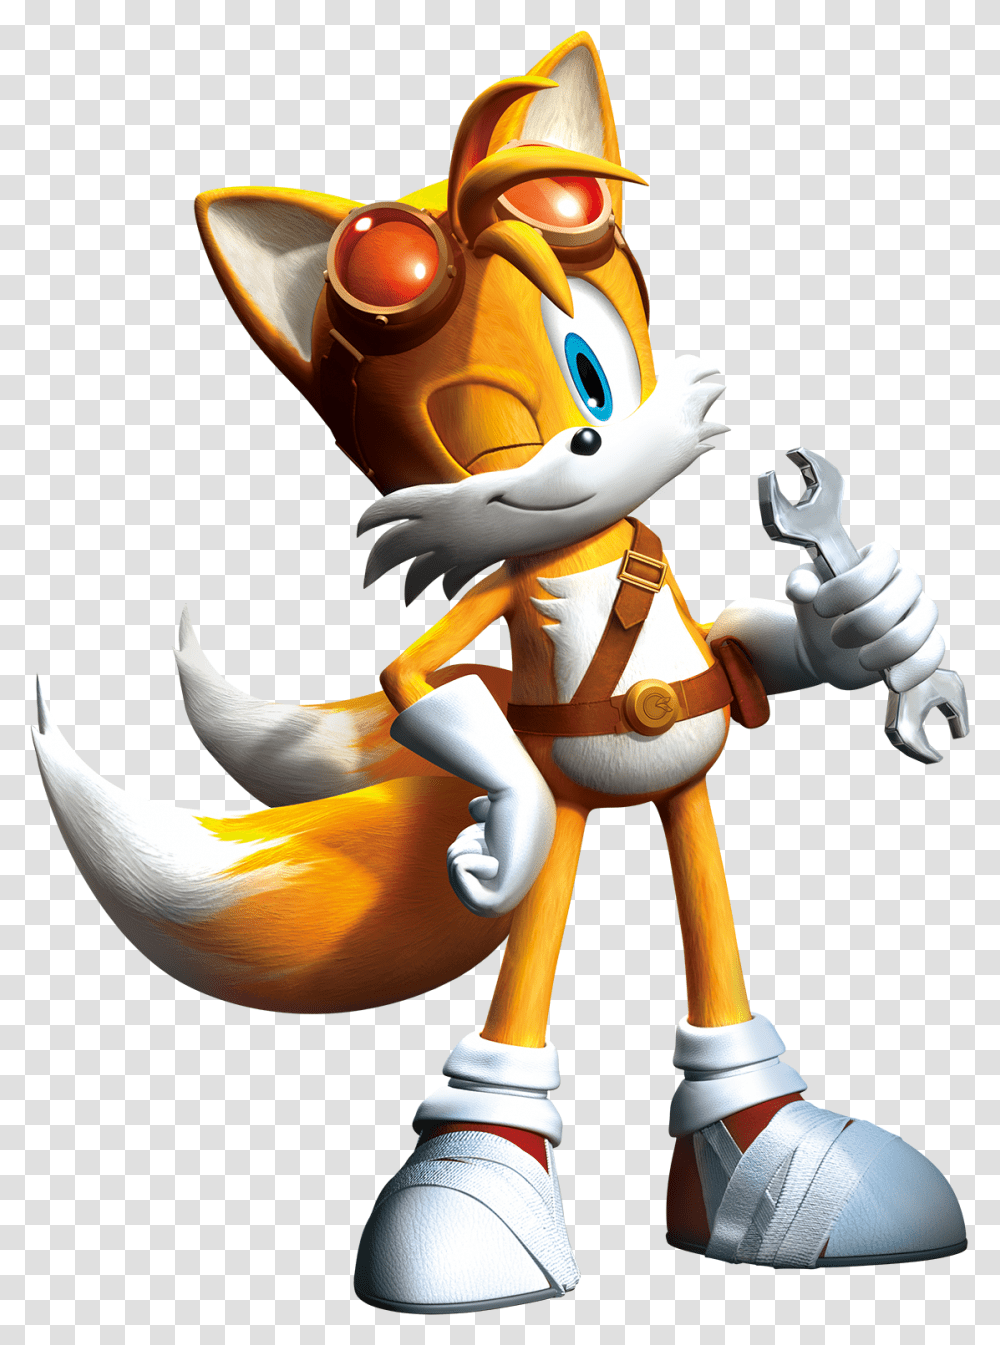 Tails Sonic Boom Tails The Hedgehog, Toy, Dragon, Figurine, Wasp Transparent Png